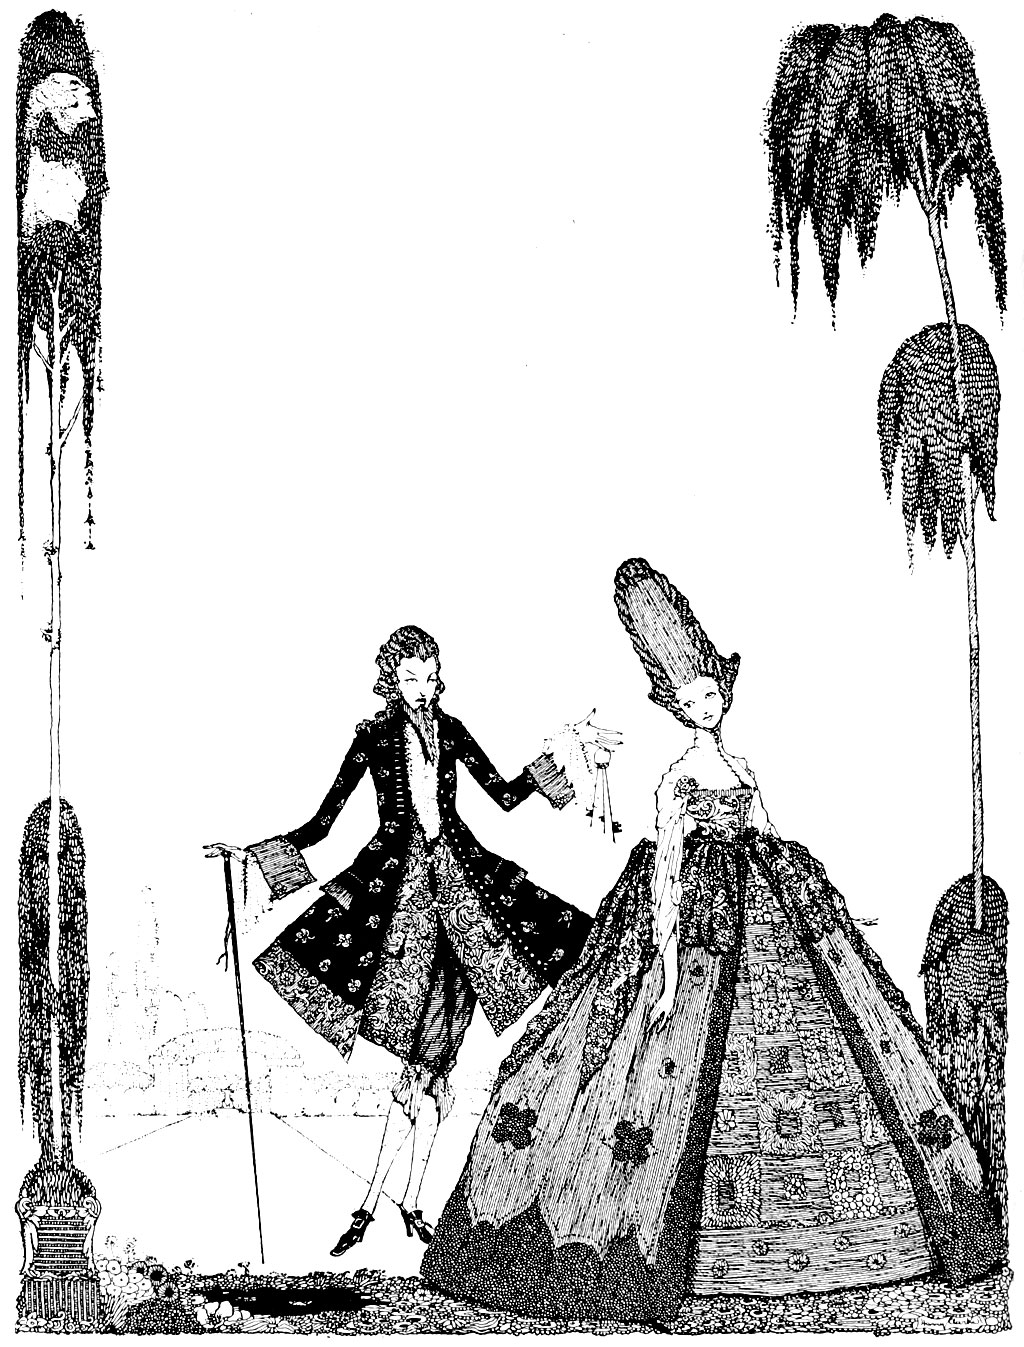 From the Fairy Tales of Charles Perrault, Harry Clarke